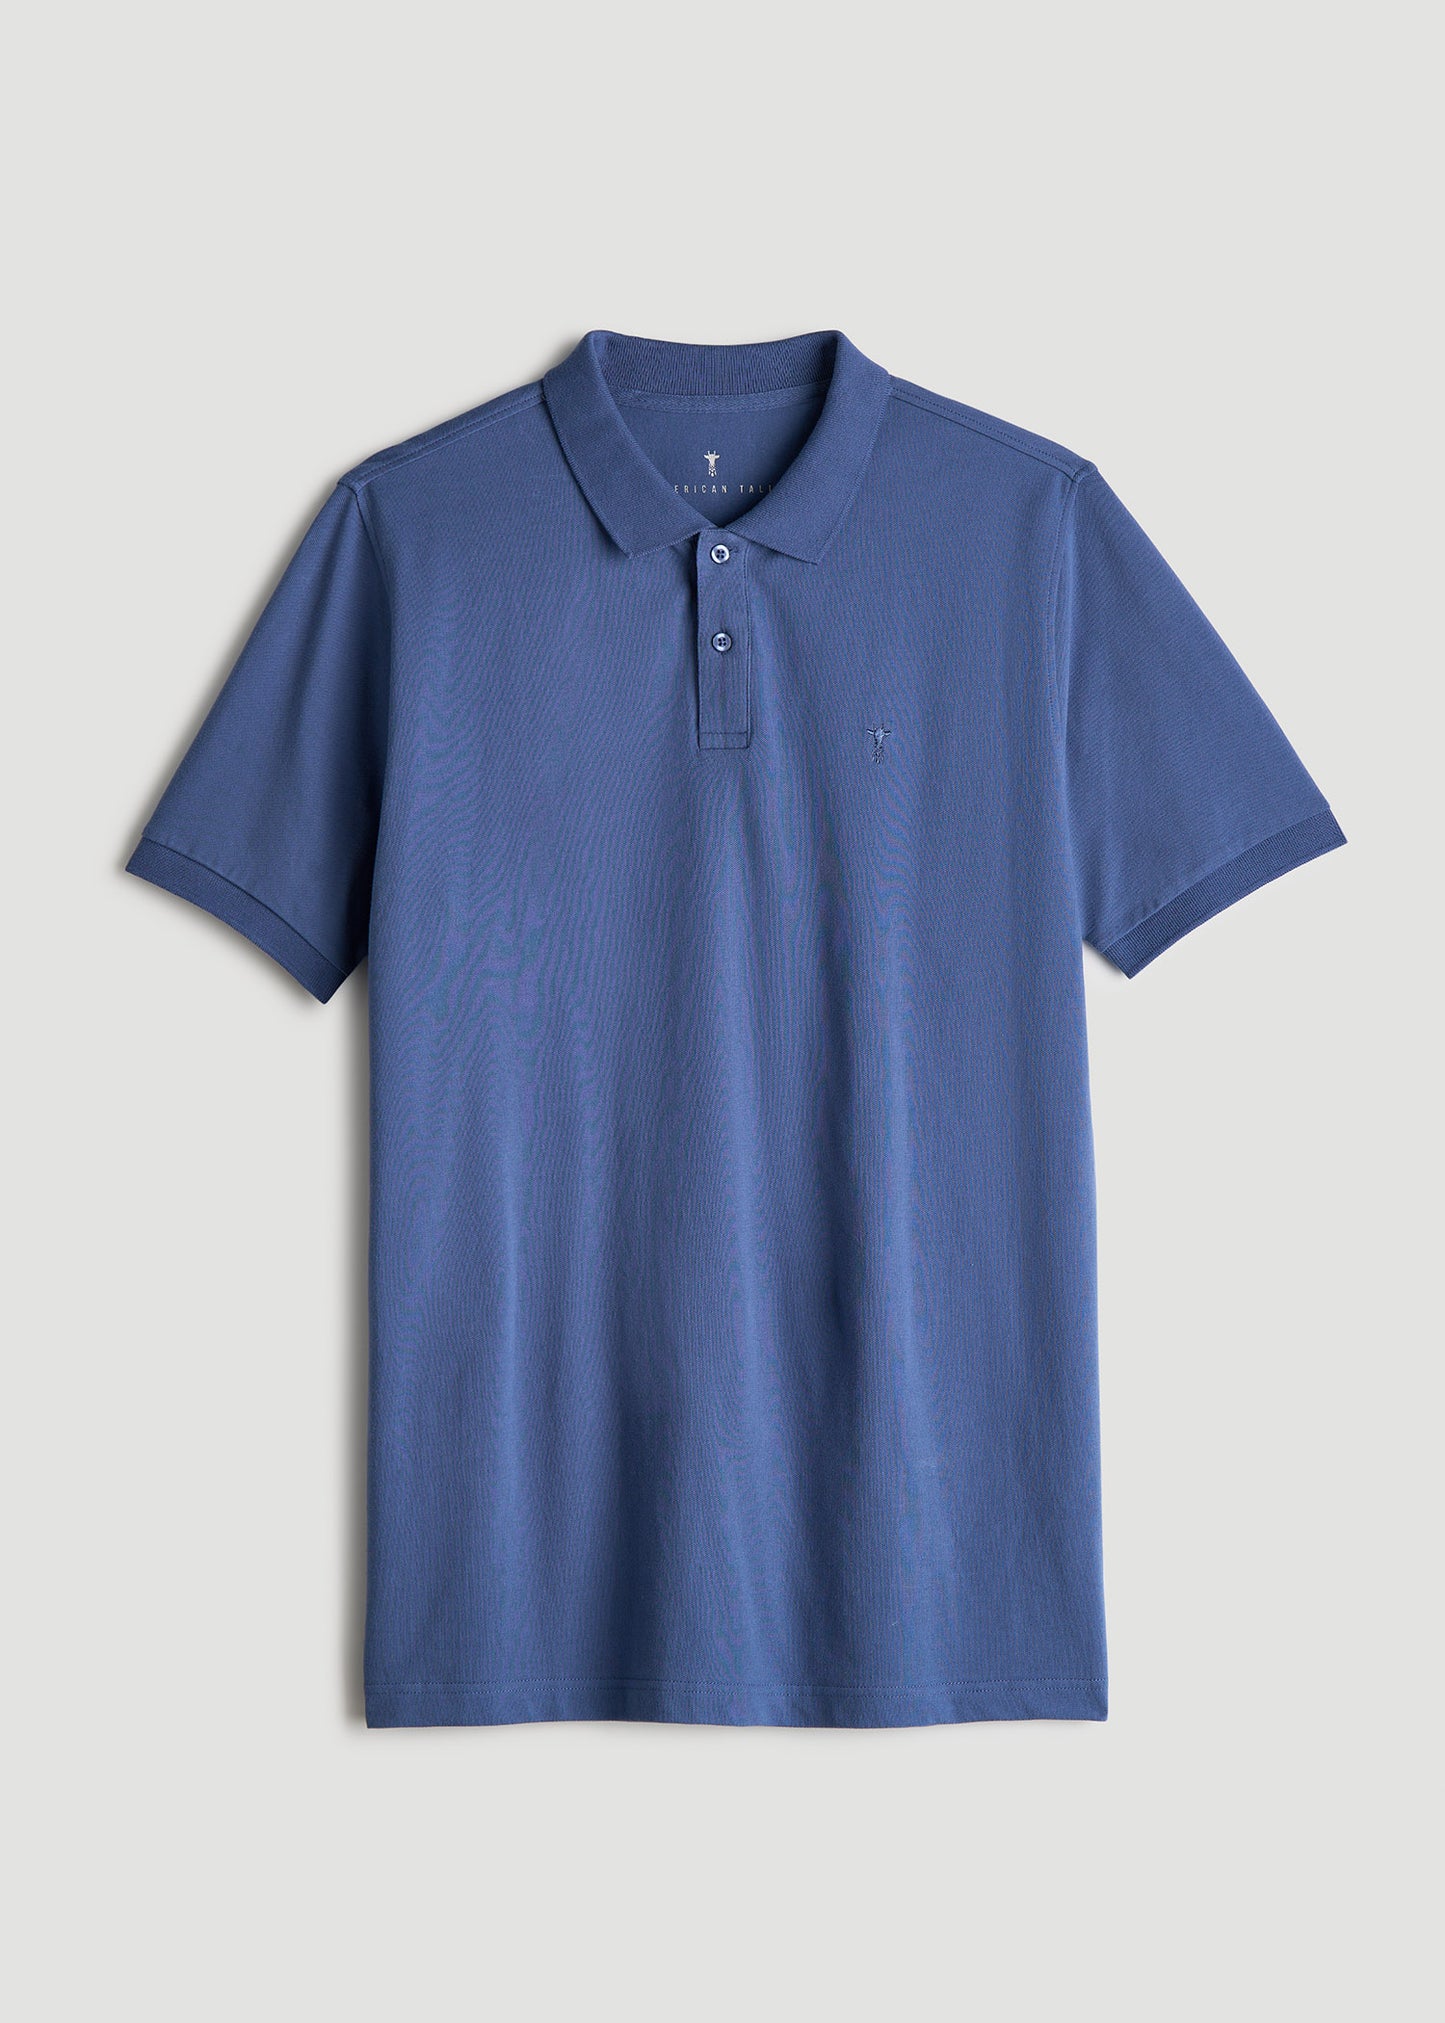 Men's Tall Classic Polo with Embroidered Logo in Marine Navy